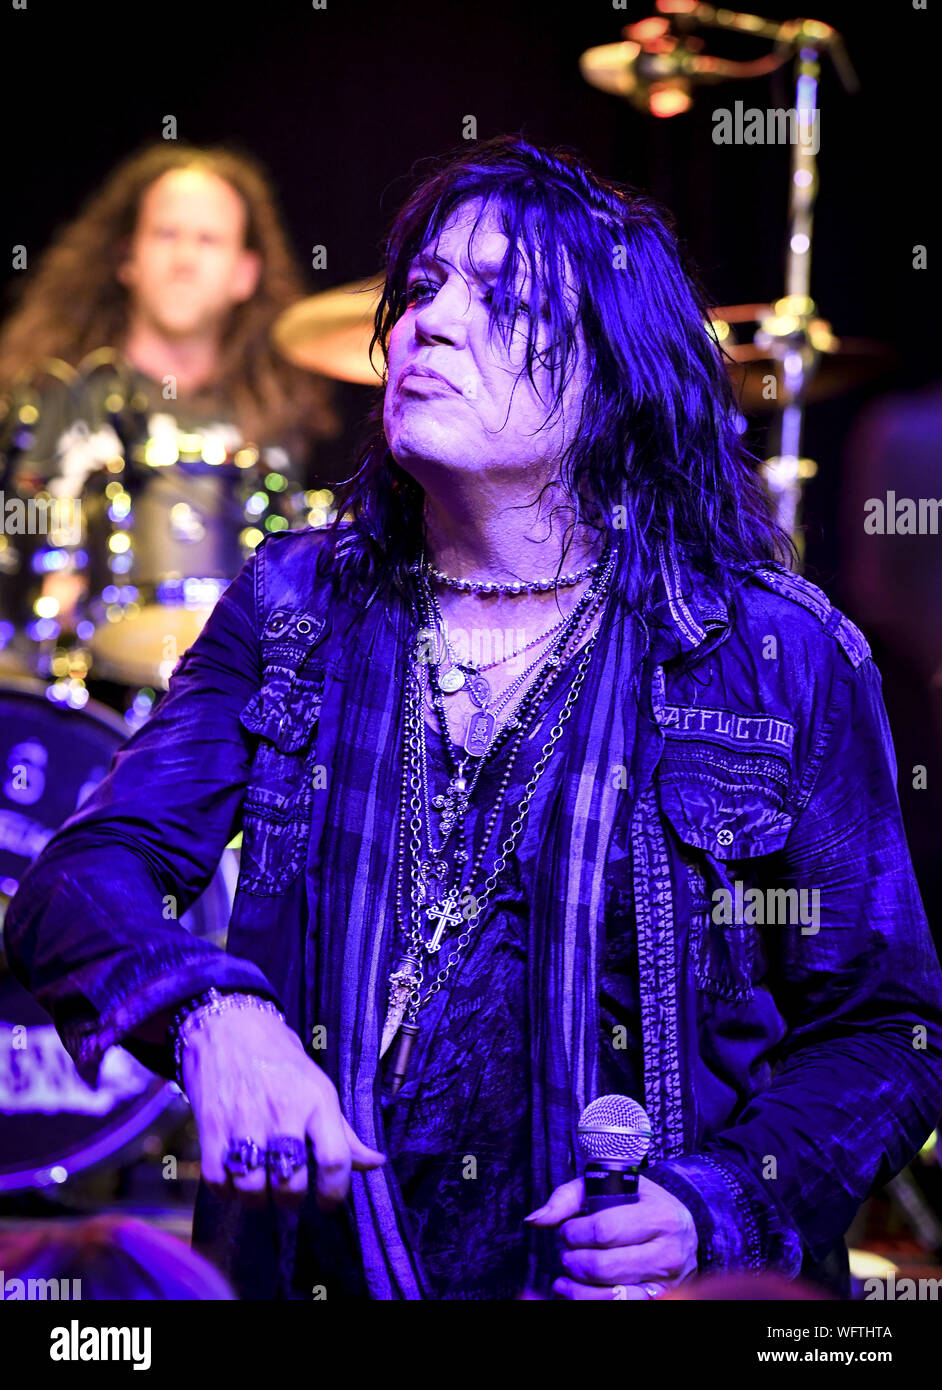 August 30, 2019, San Juan Capistrano, CA, U.S: Tom Keifer, Vocals for the '' KEIFER BAND'' Performs at The Coach House in San Juan Capistrano during  their Rise Tour on August 30th, 2019 (